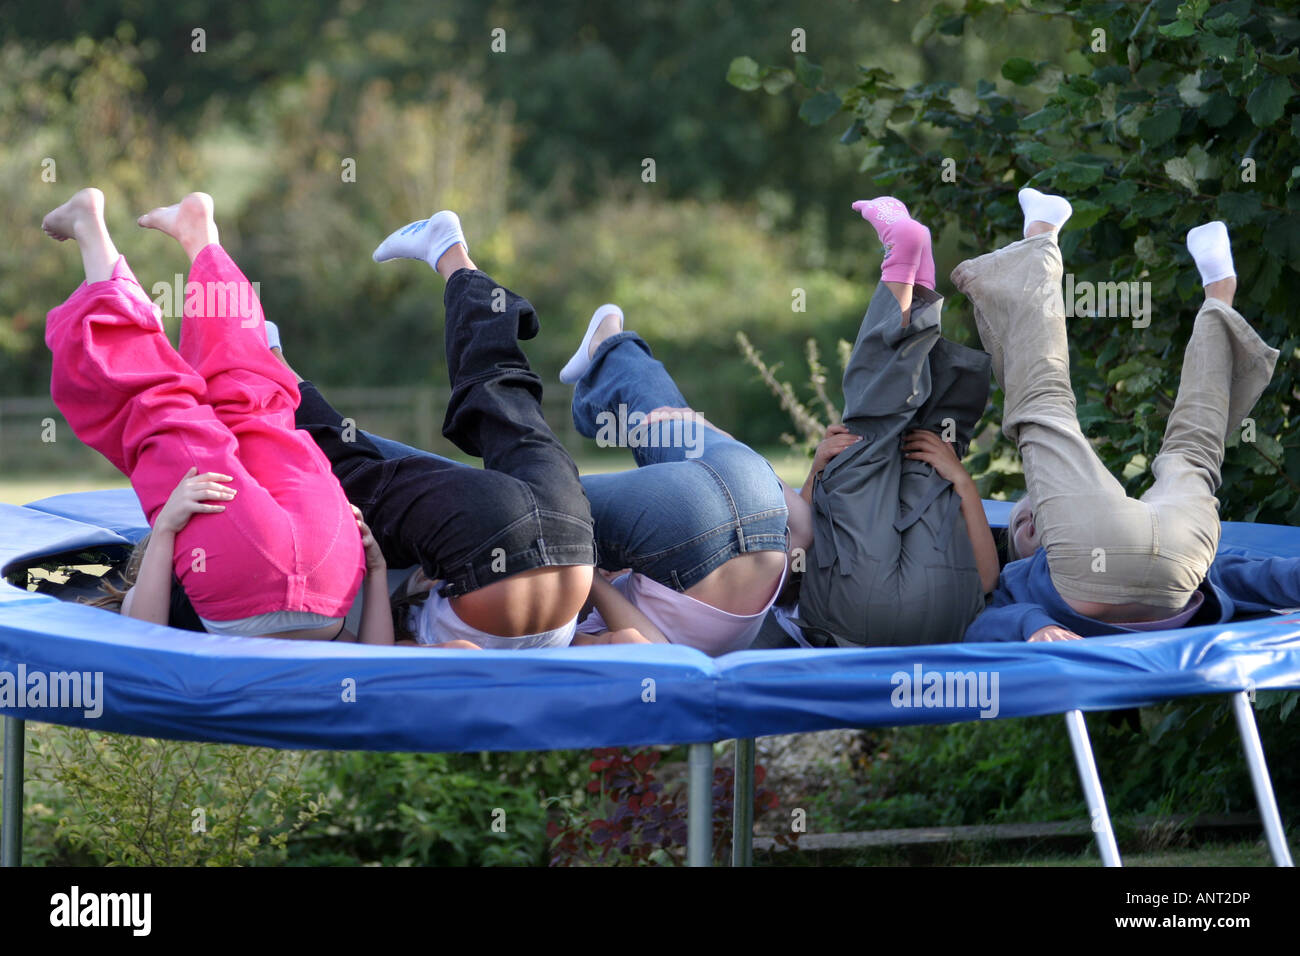 Five girls having a great time on a trampoline Stock Photo